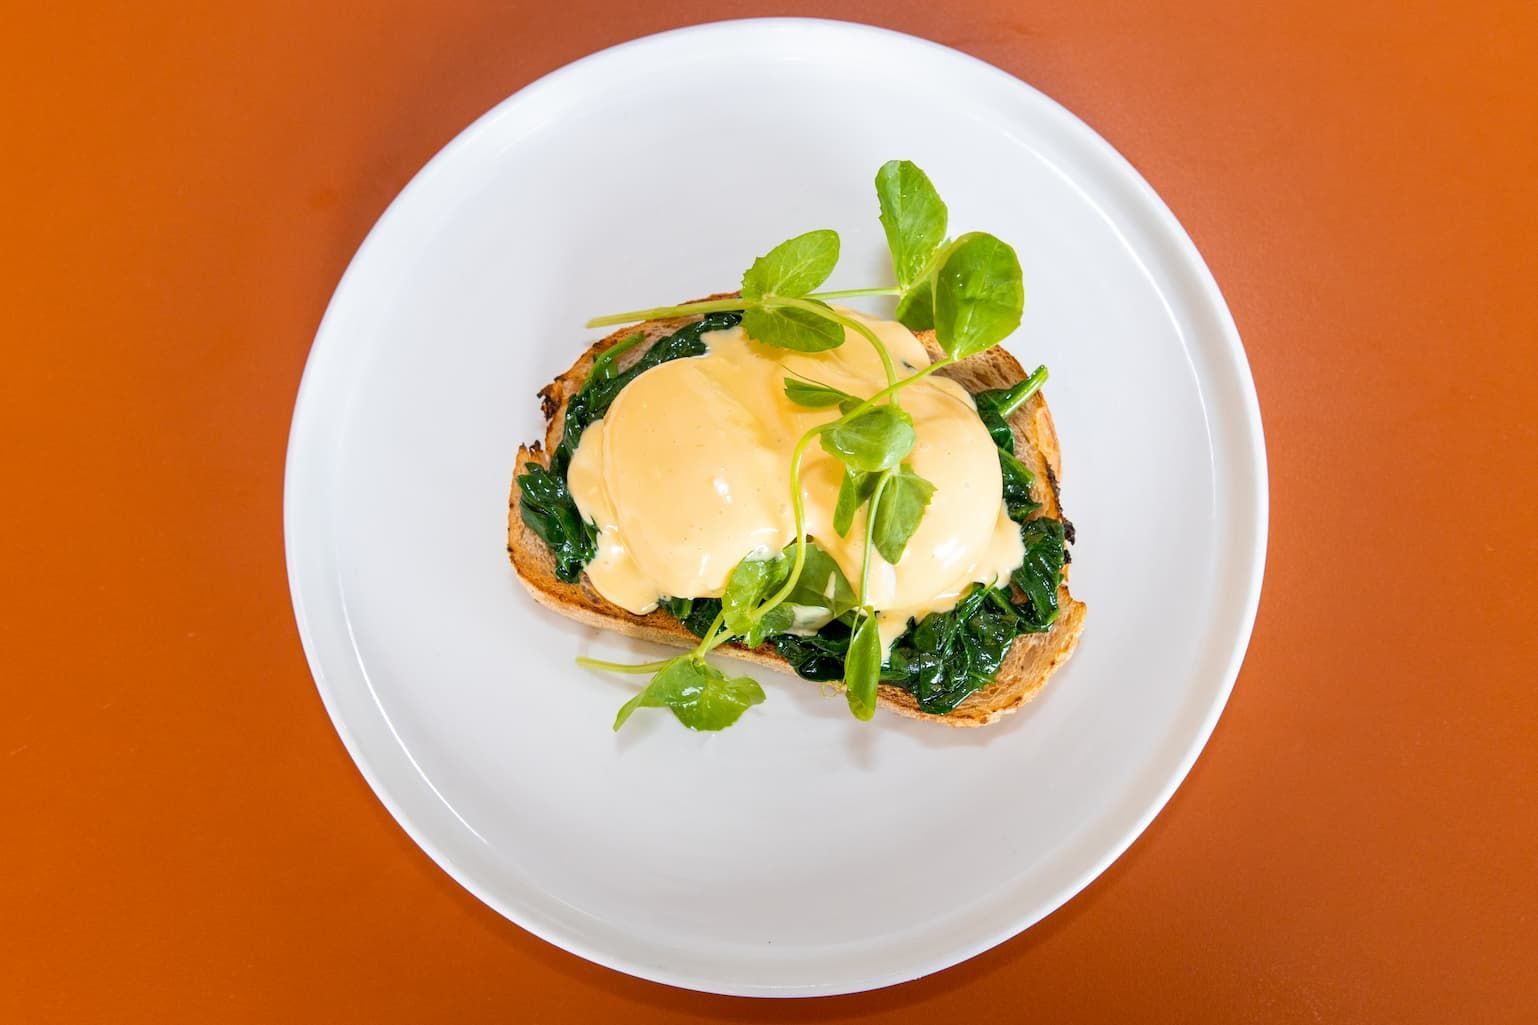 Eggs Florentine — Cafe, Bar and Catering Services in Southport, QLD